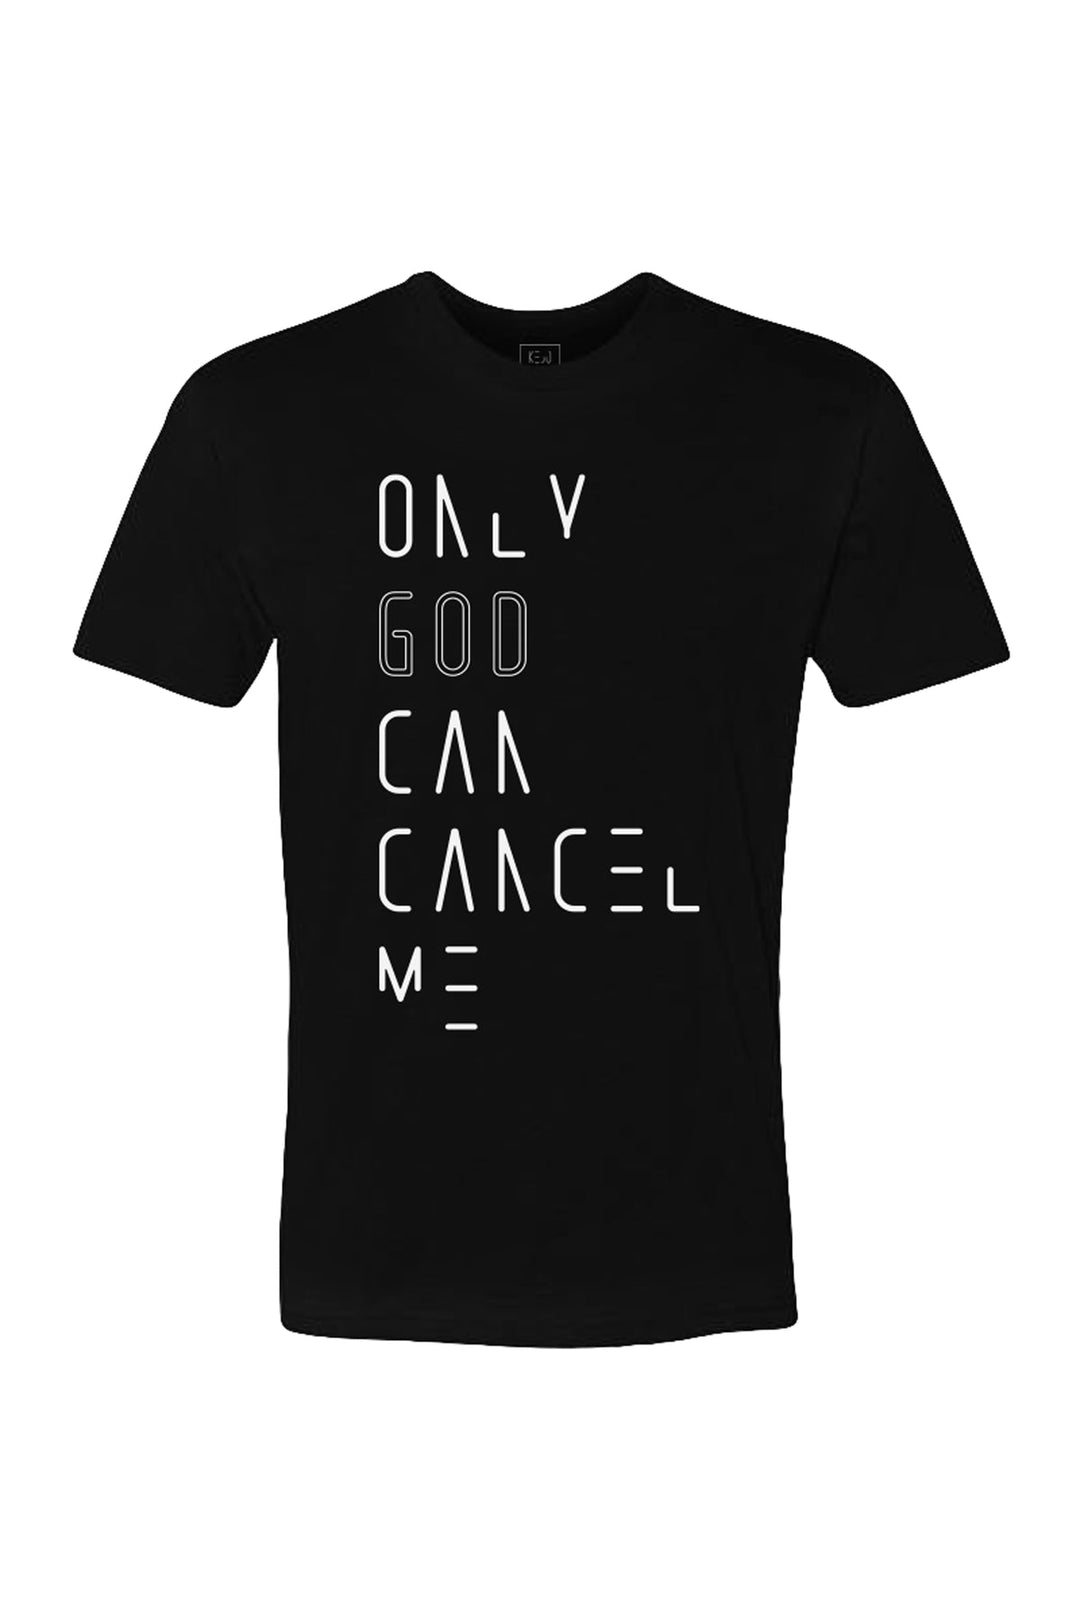 Only God Can Cancel Me (Negative Space) - Men